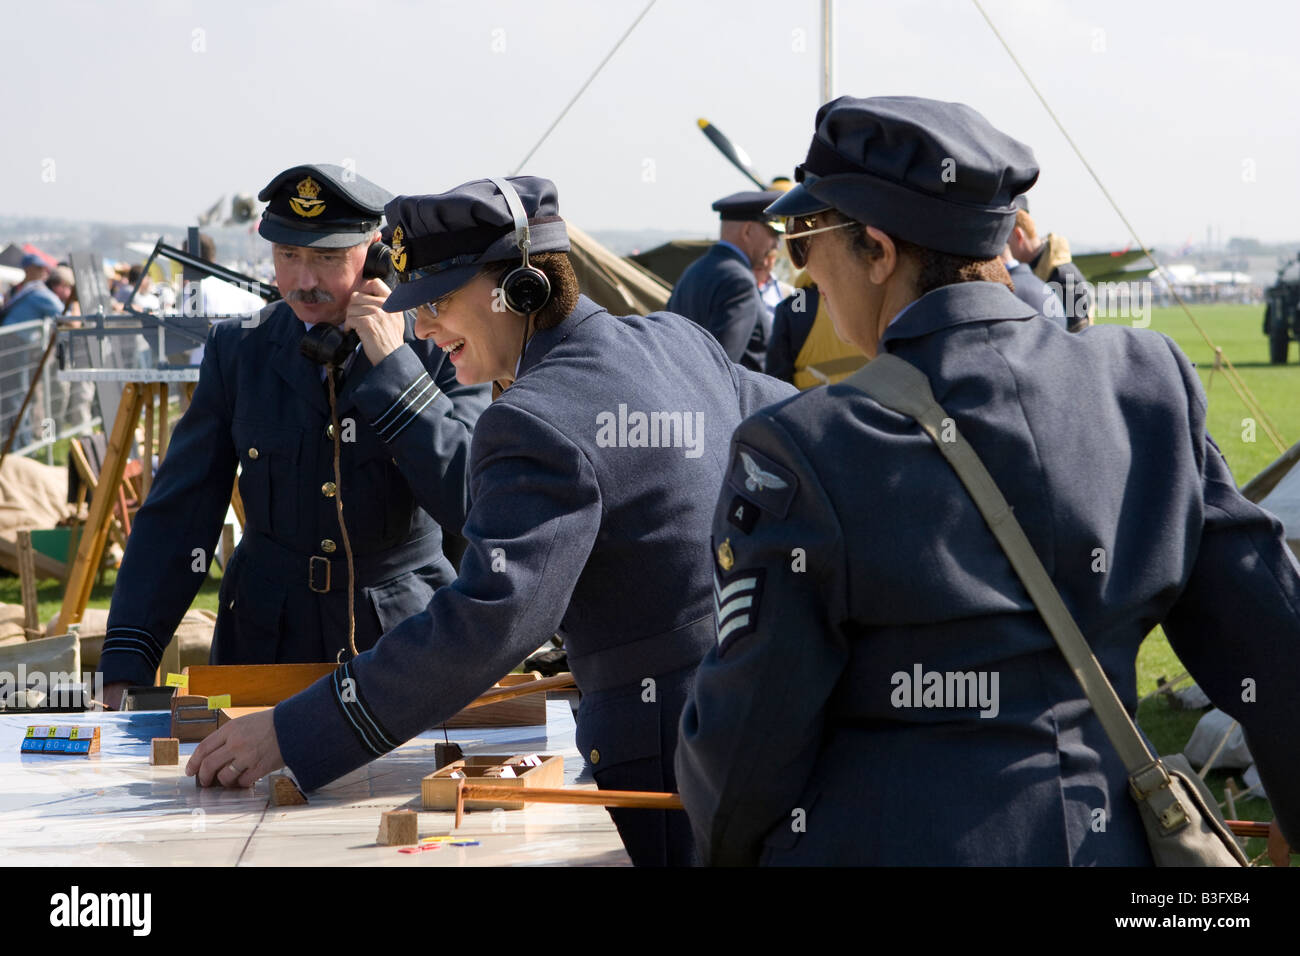 Actors in RAF uniform plotting position of aircraft during second world war re enactment Stock Photo